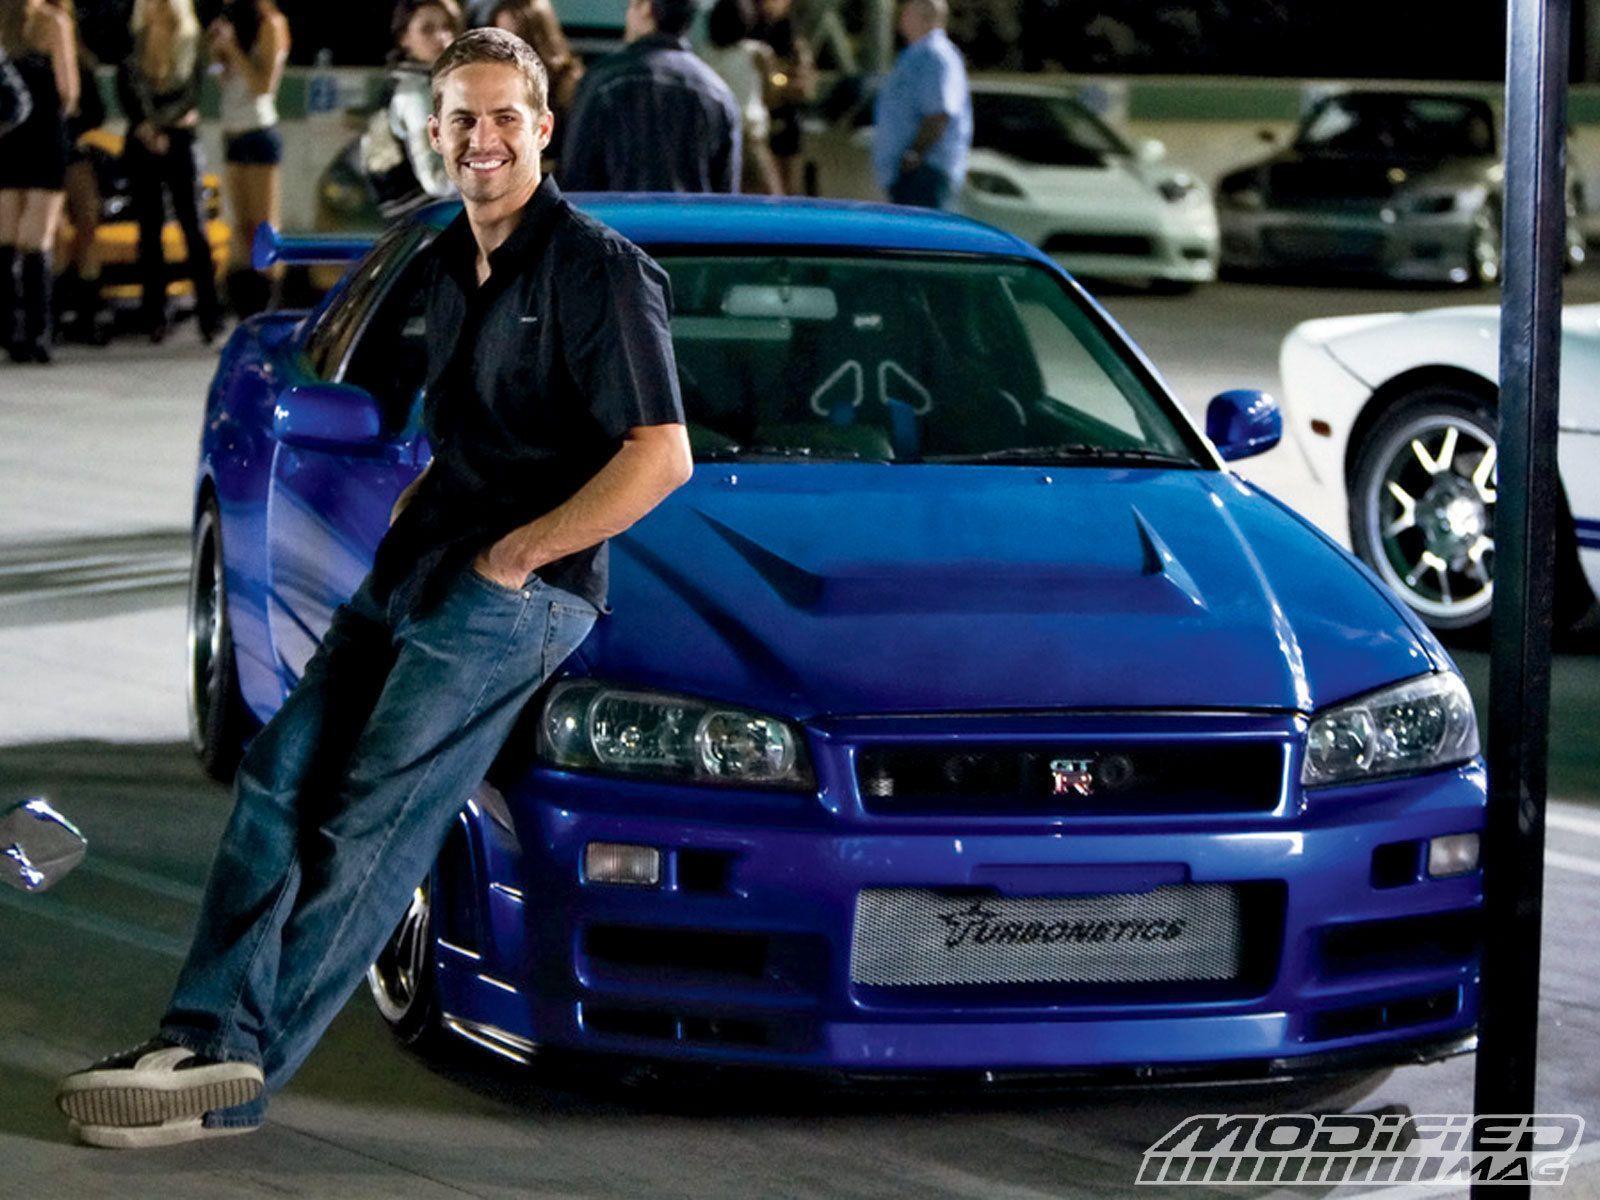 Actor Paul Walker and his awesome car wallpaper and image